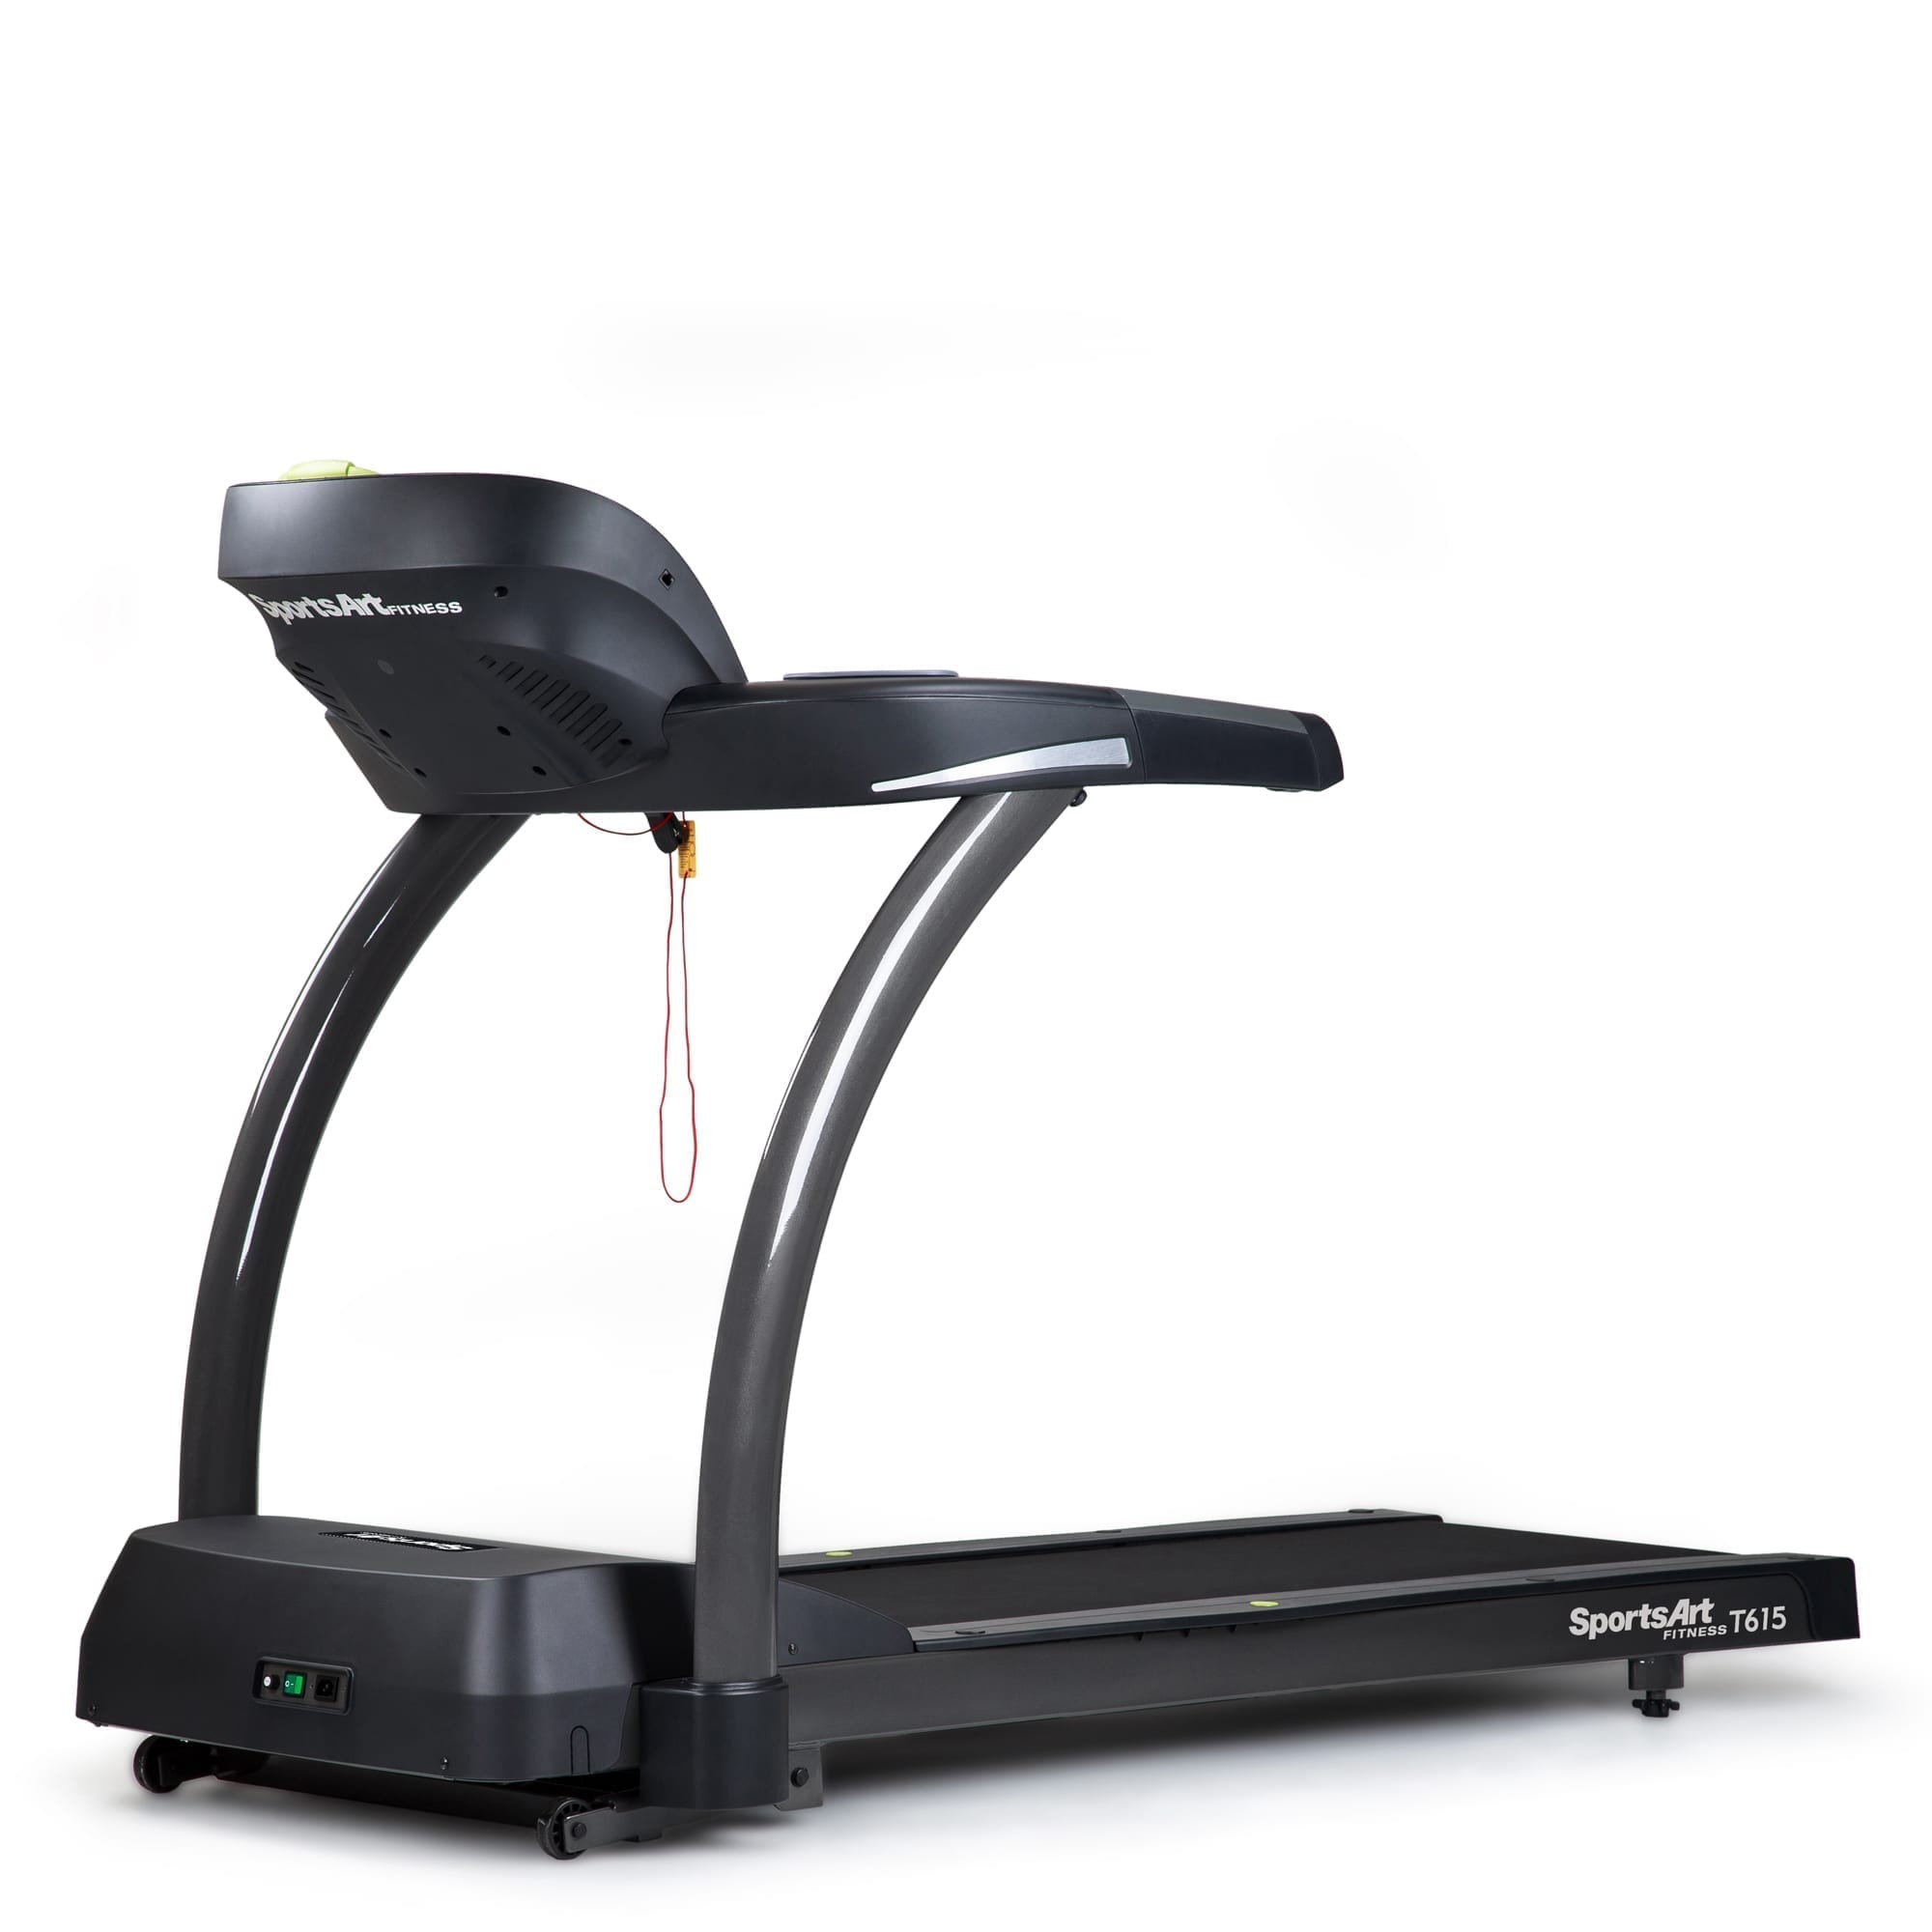 SportsArt Foundation Treadmill With Chr and Eco-Glide, T615-CHR front facing side view angle